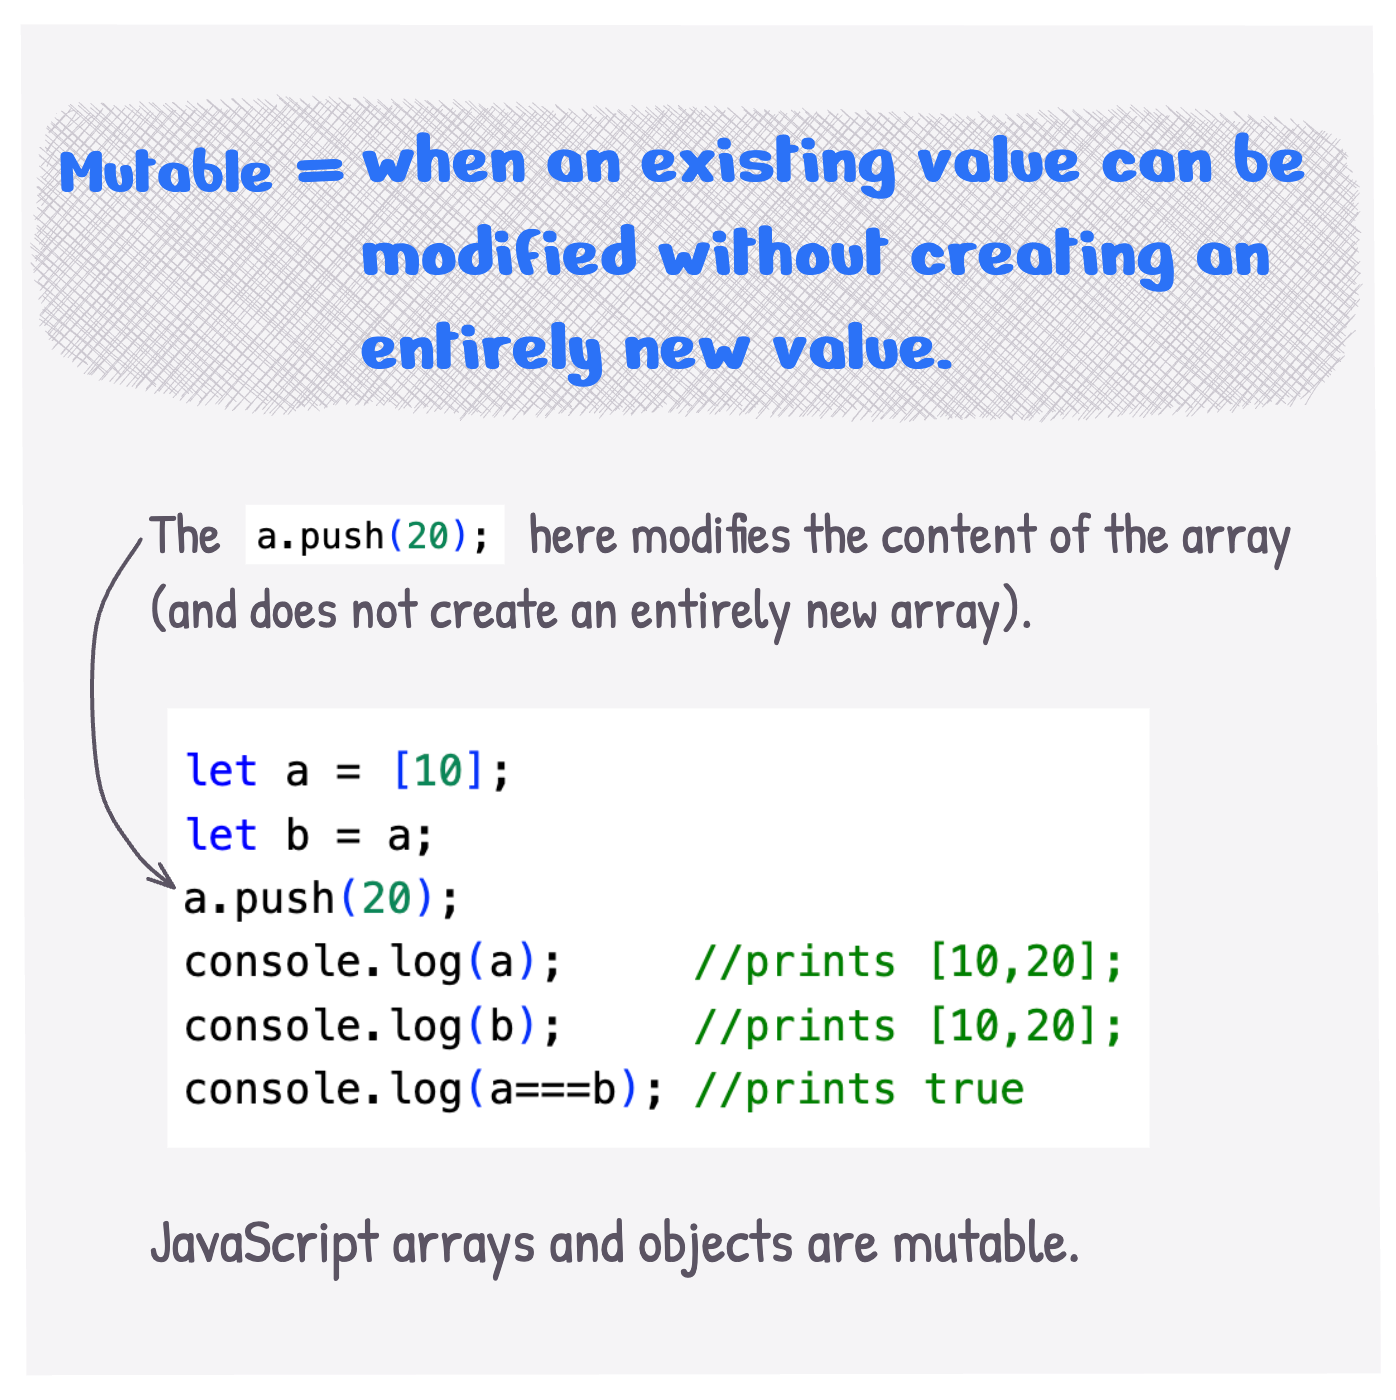 Mutable = when an existing value can be modified without creating an entirely new value. JavaScript arrays and objects are mutable.